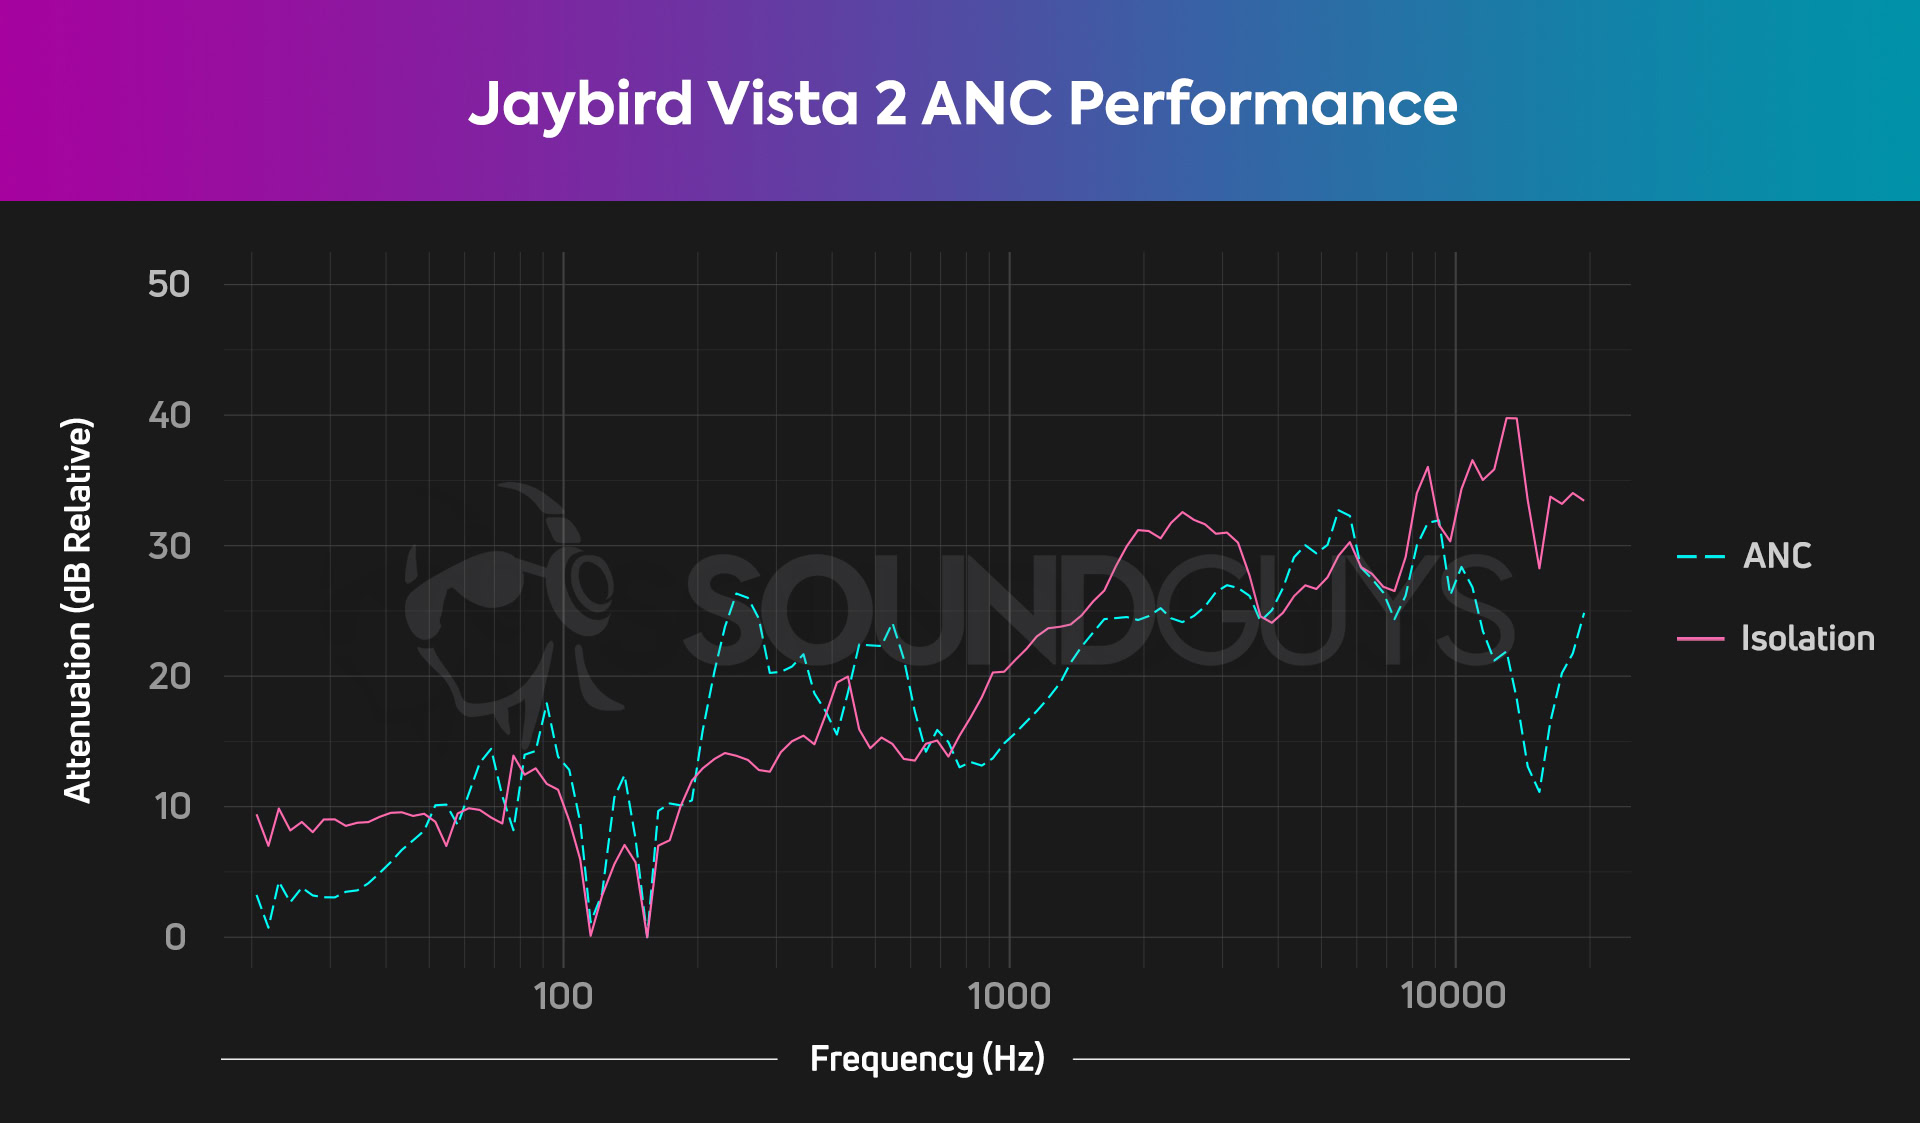 Chart showing frequence  simplification  from isolation and ANC connected  the Jaybird Vista 2